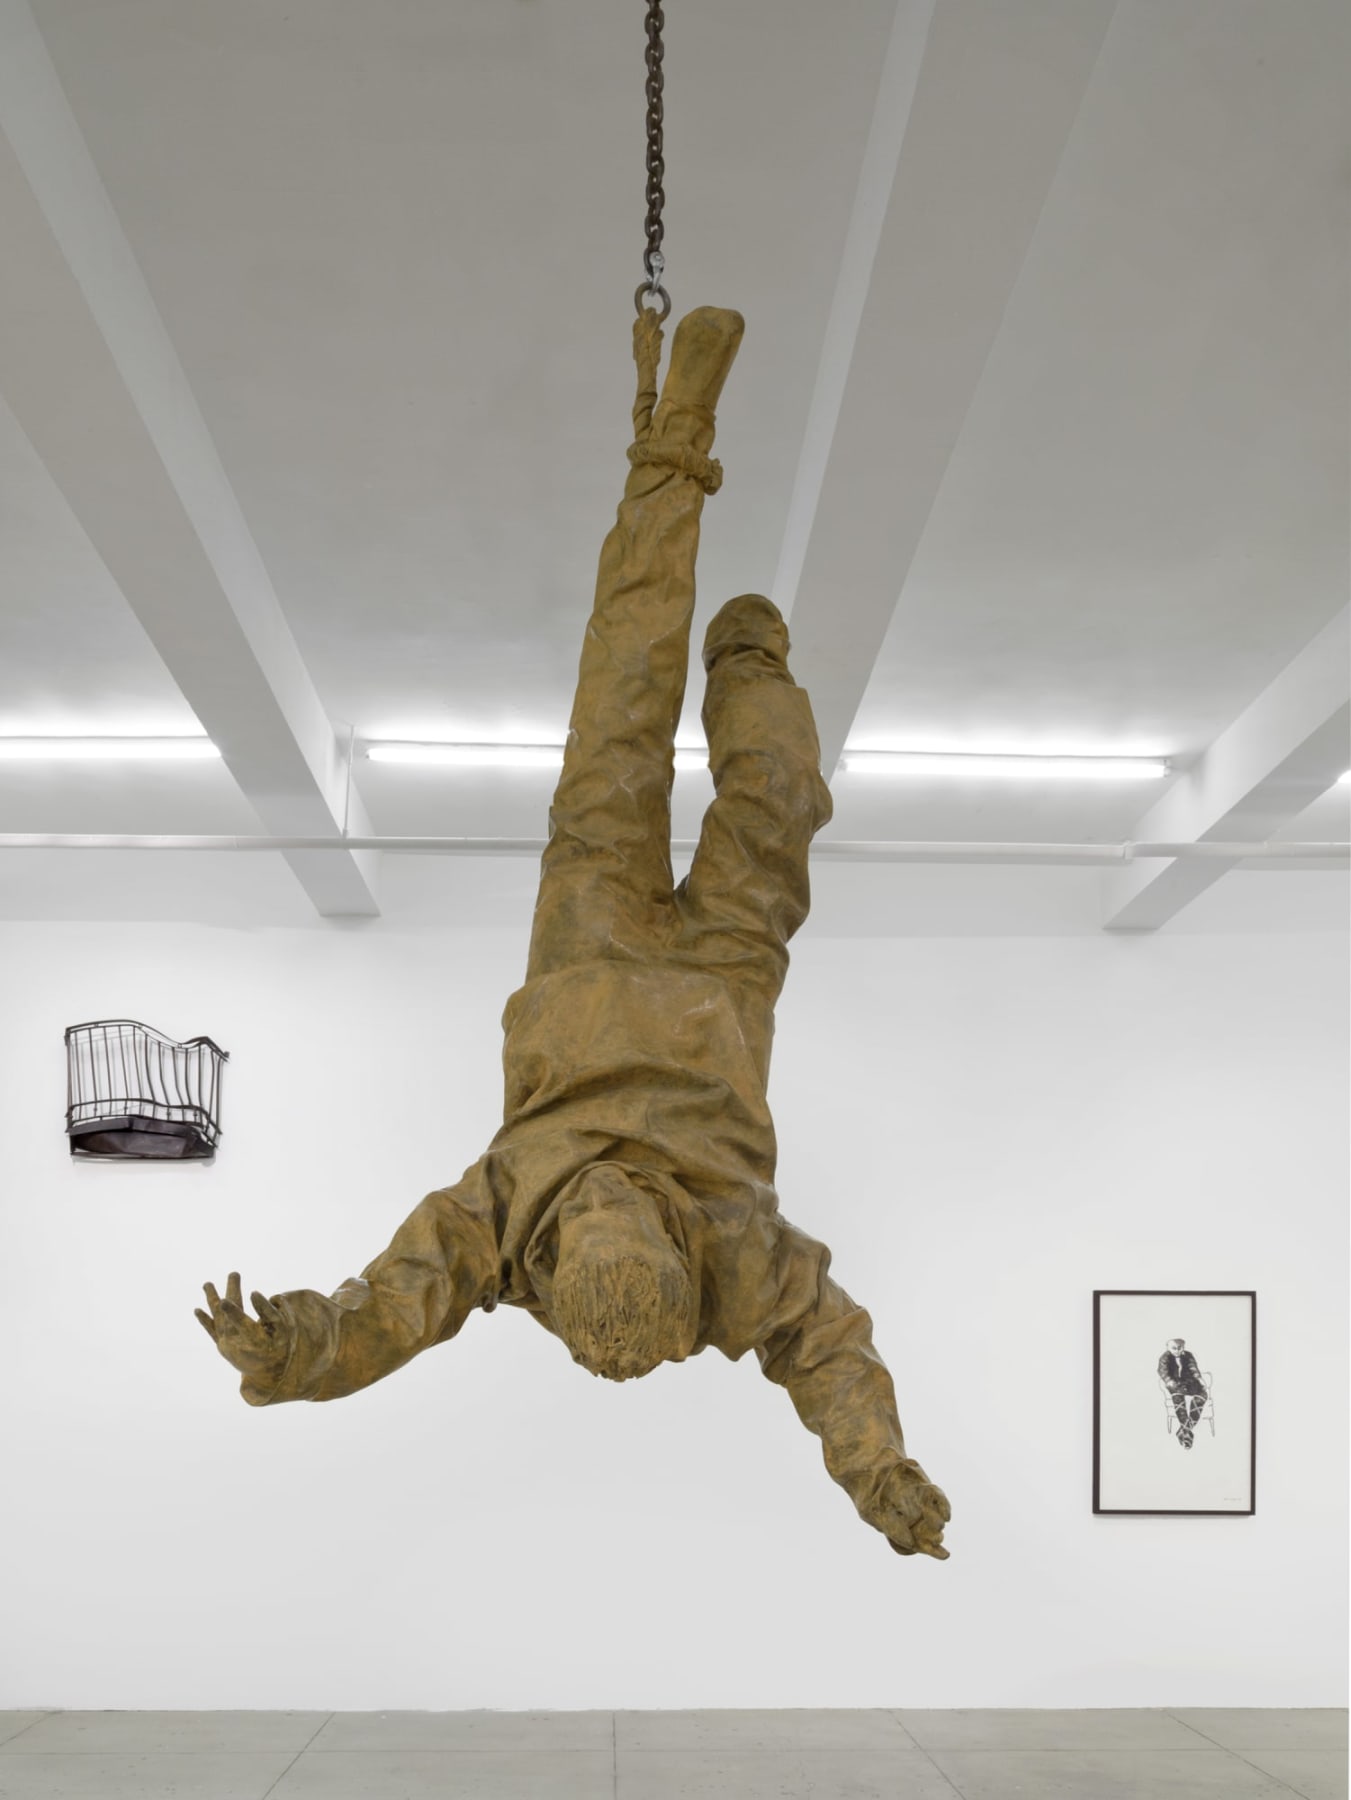 Sculpture of person suspended in air upside down by the foot